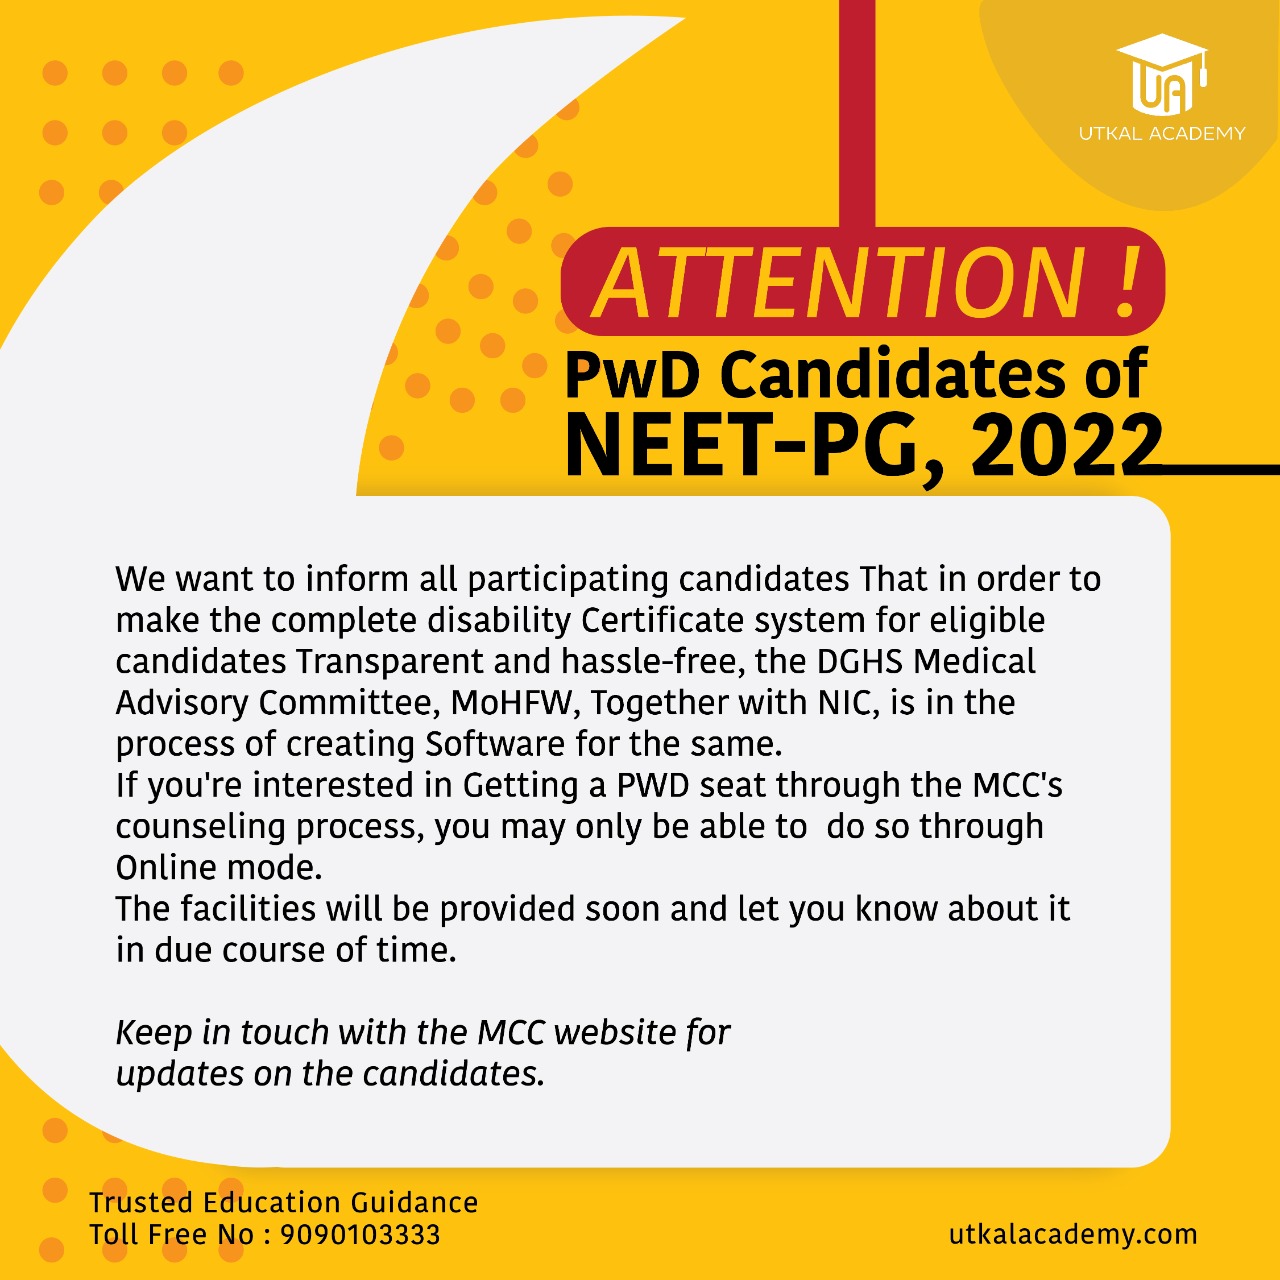 Attention !! PwD Candidates of NEET-PG,